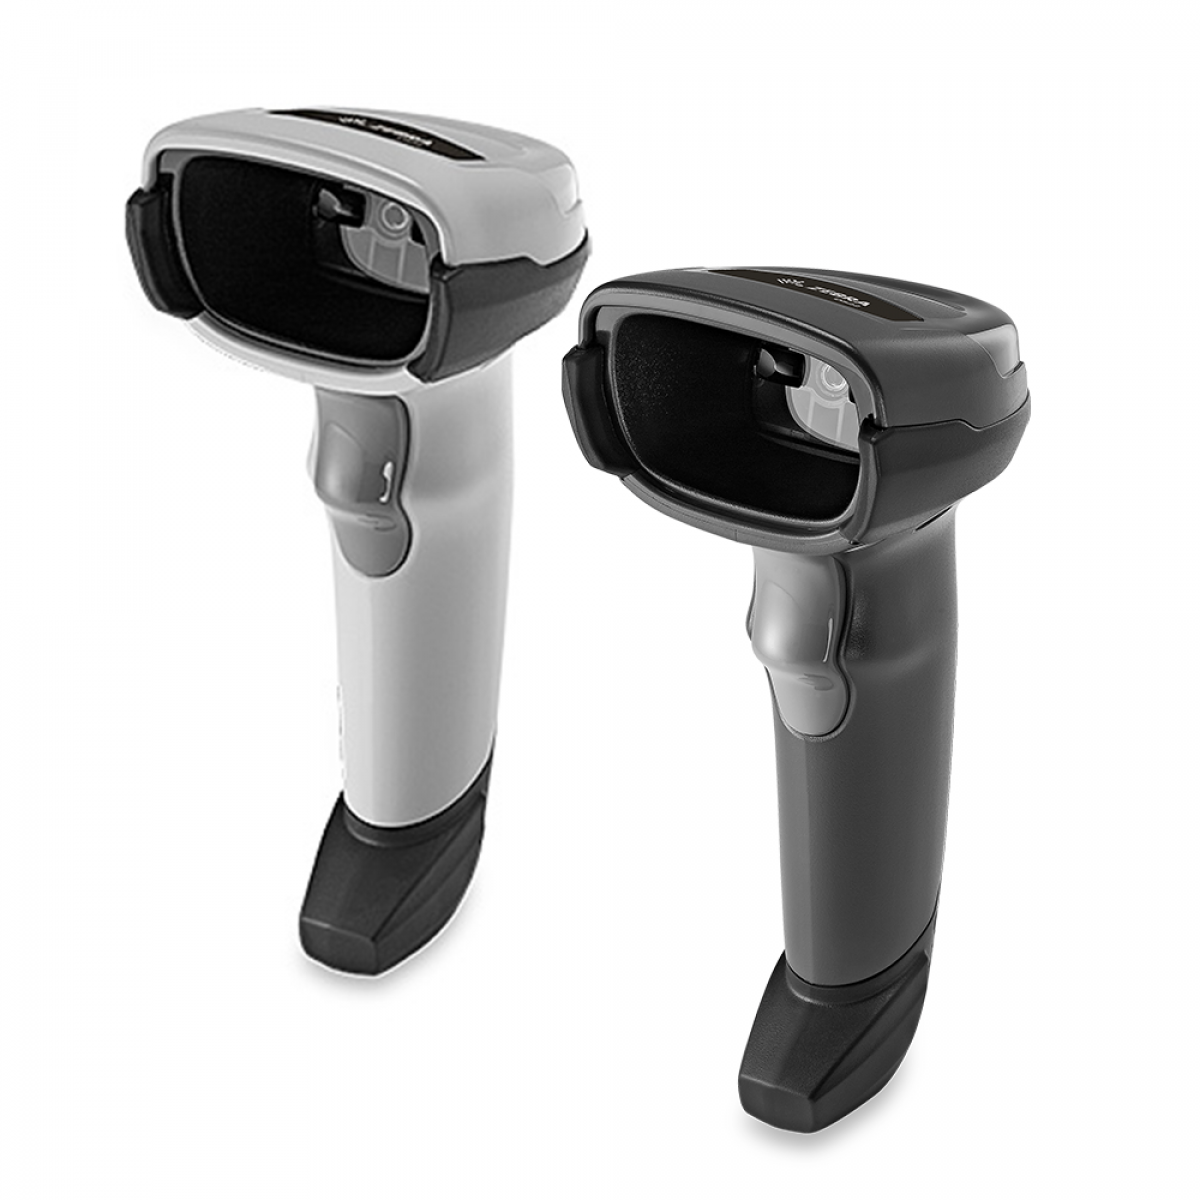 Zebra DS2208 - White or Black barcode scanners/imagers